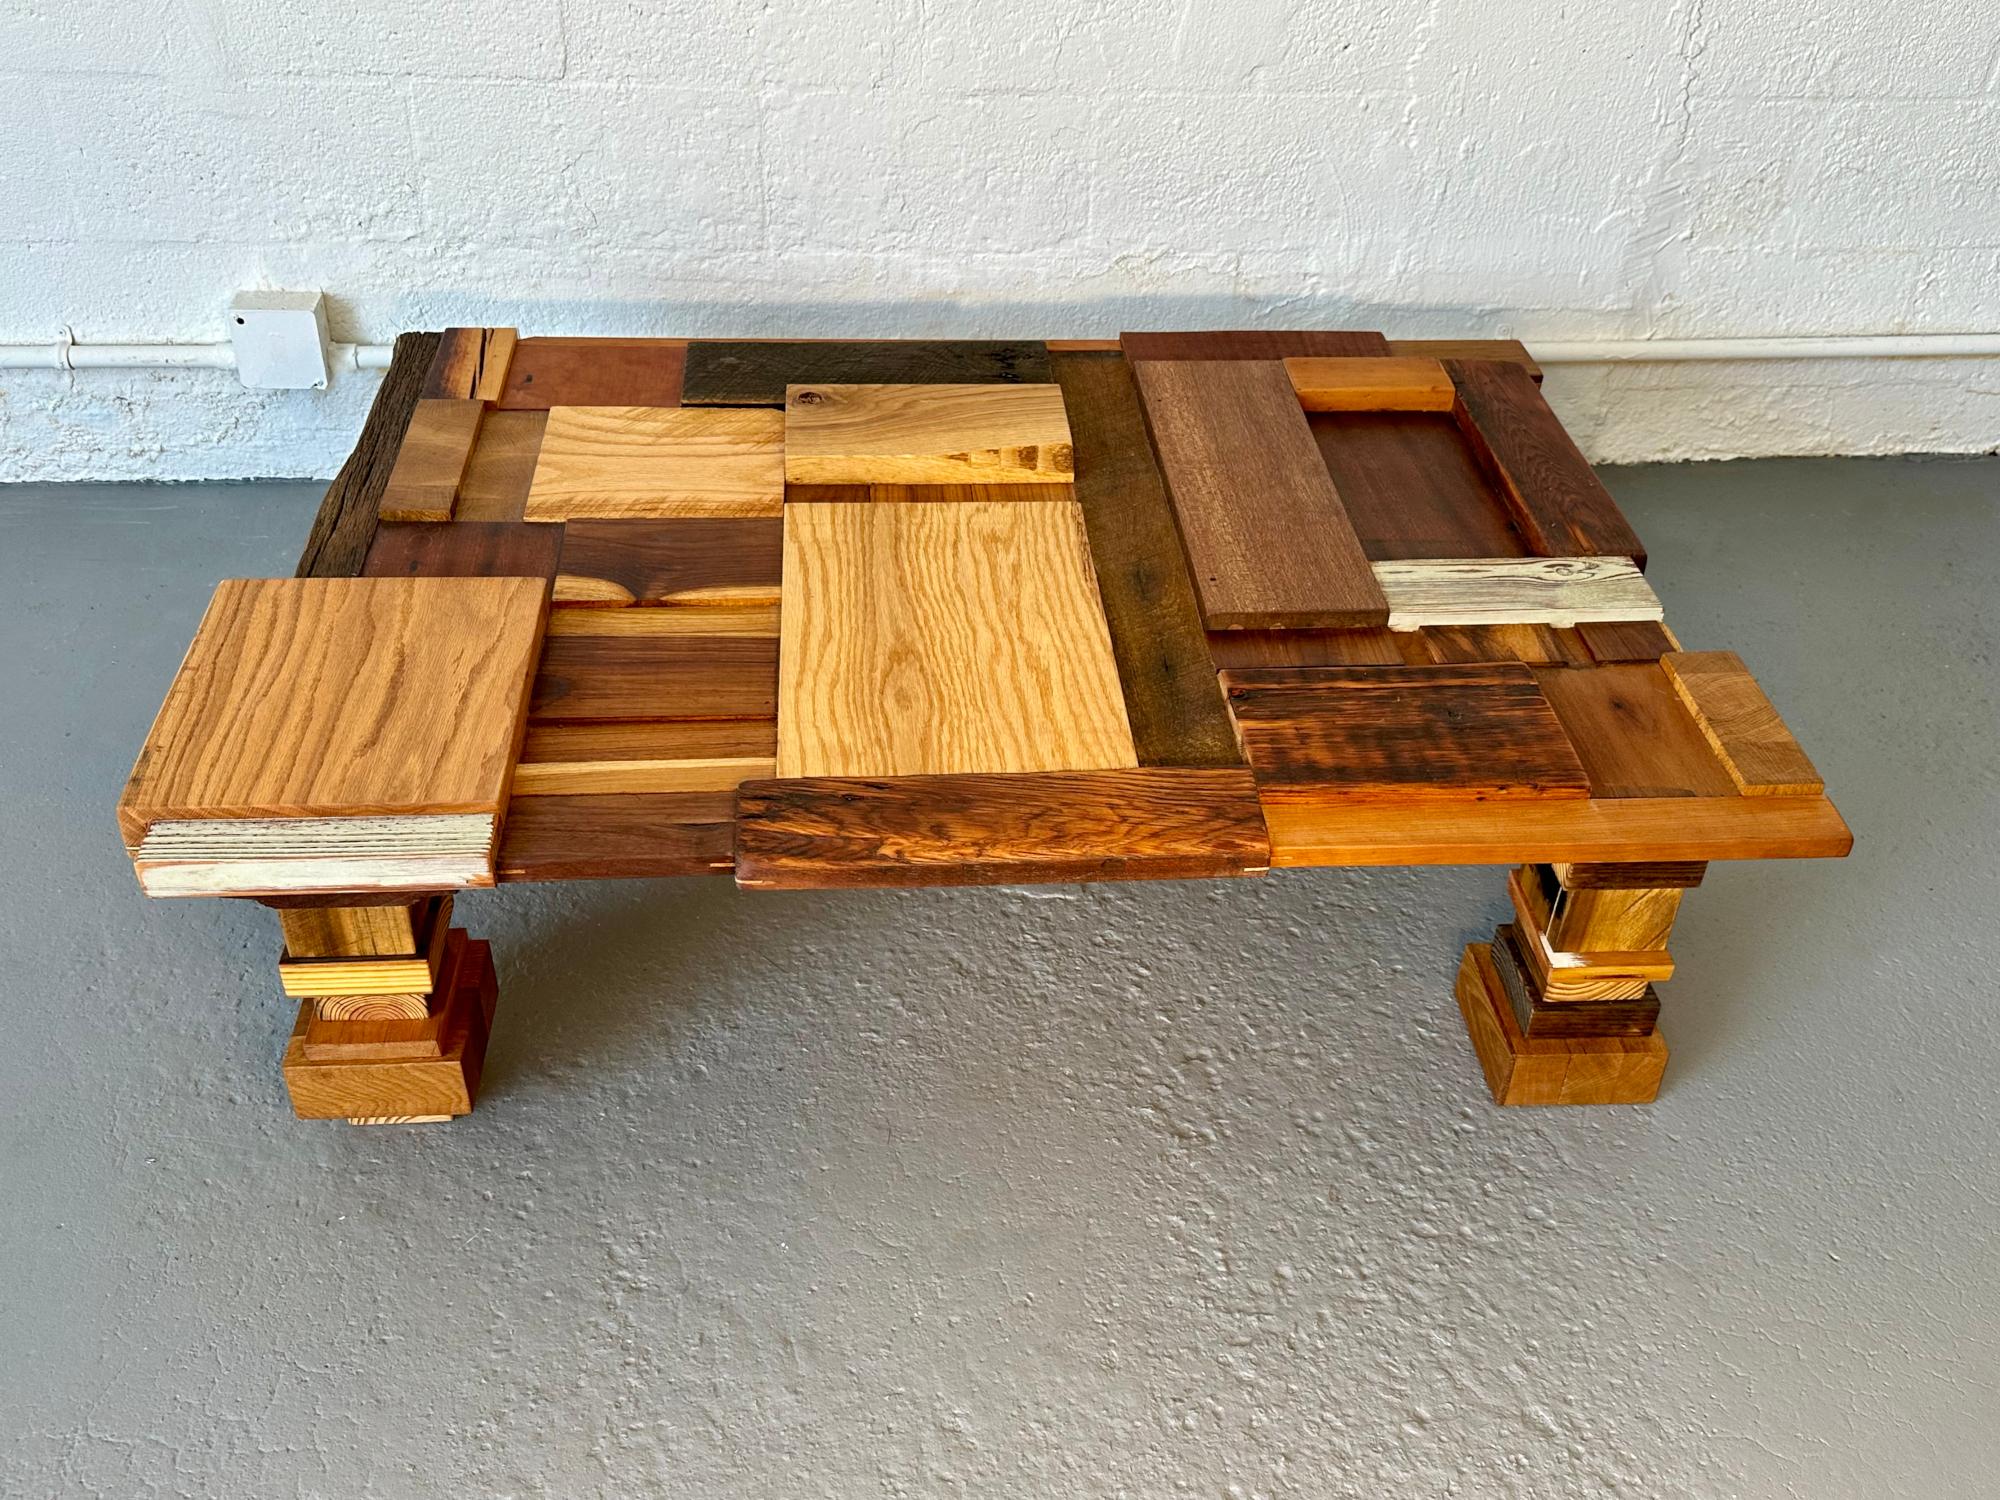 Inspired by the building bricks Lego, Rafael meticulously designed and handcrafted the Block Coffee Table using reclaimed hardwood pieces, transforming the remnants of woodworking into one-of-a-kind sustainable decor. Masterfully handcrafted, the